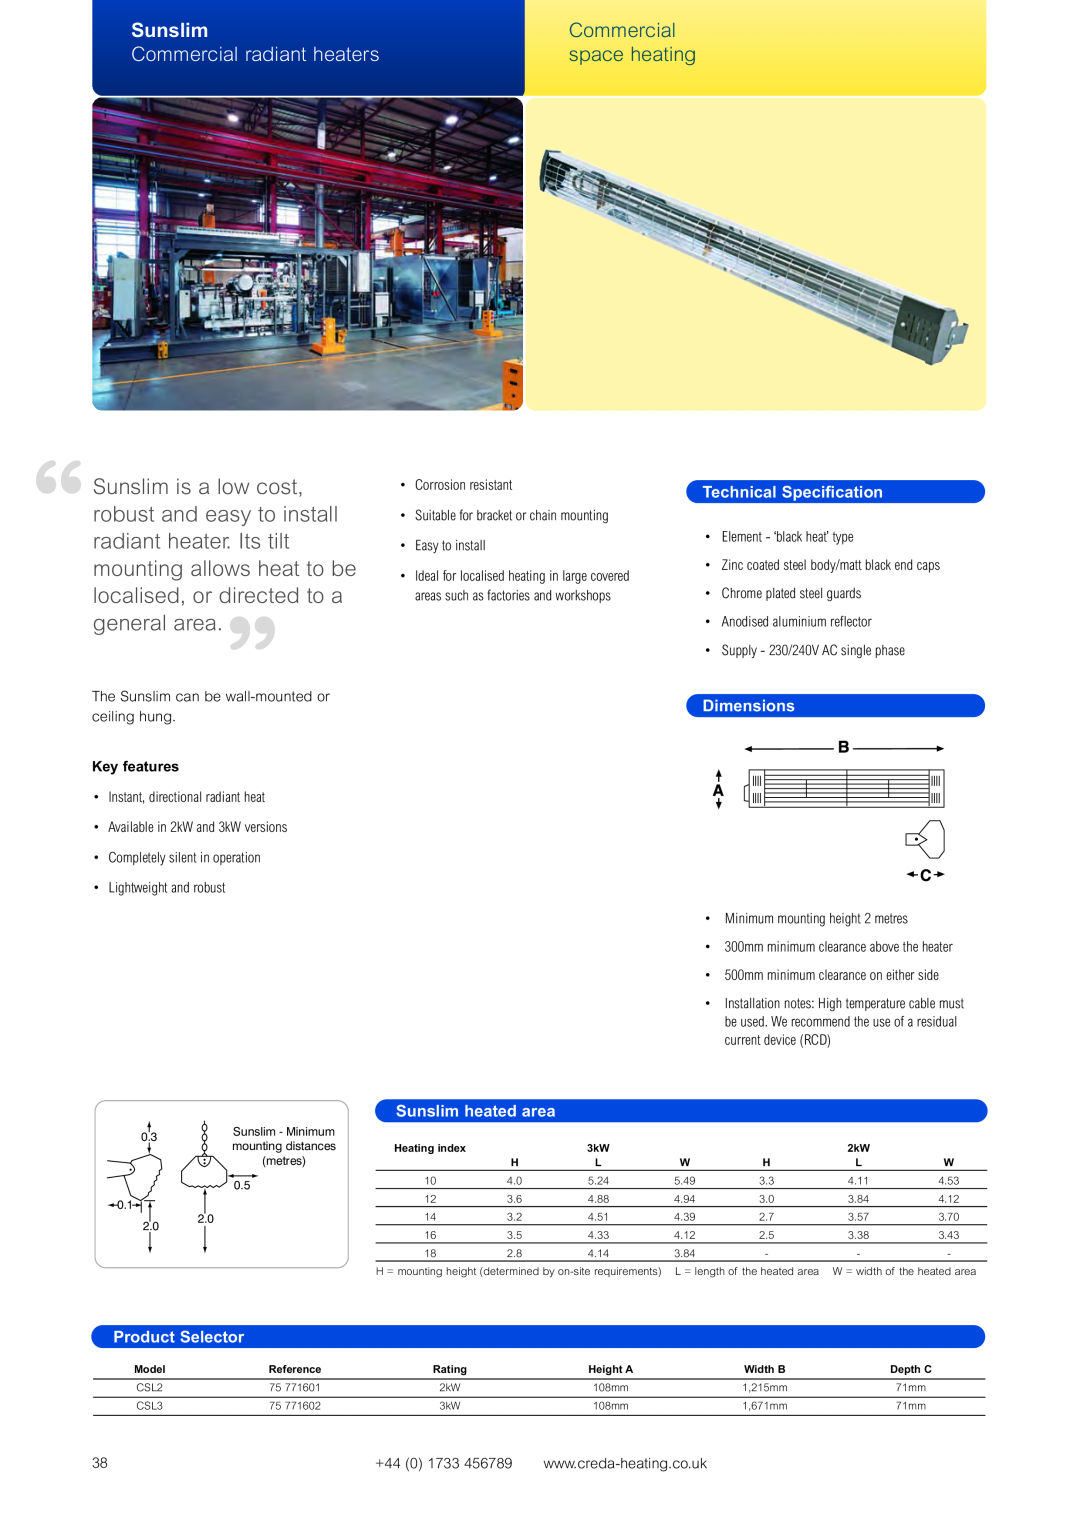 Signat CSQAD, CSP2 Commercial radiant heaters, Sunslim heated area, Commercial space heating, Technical Specification 